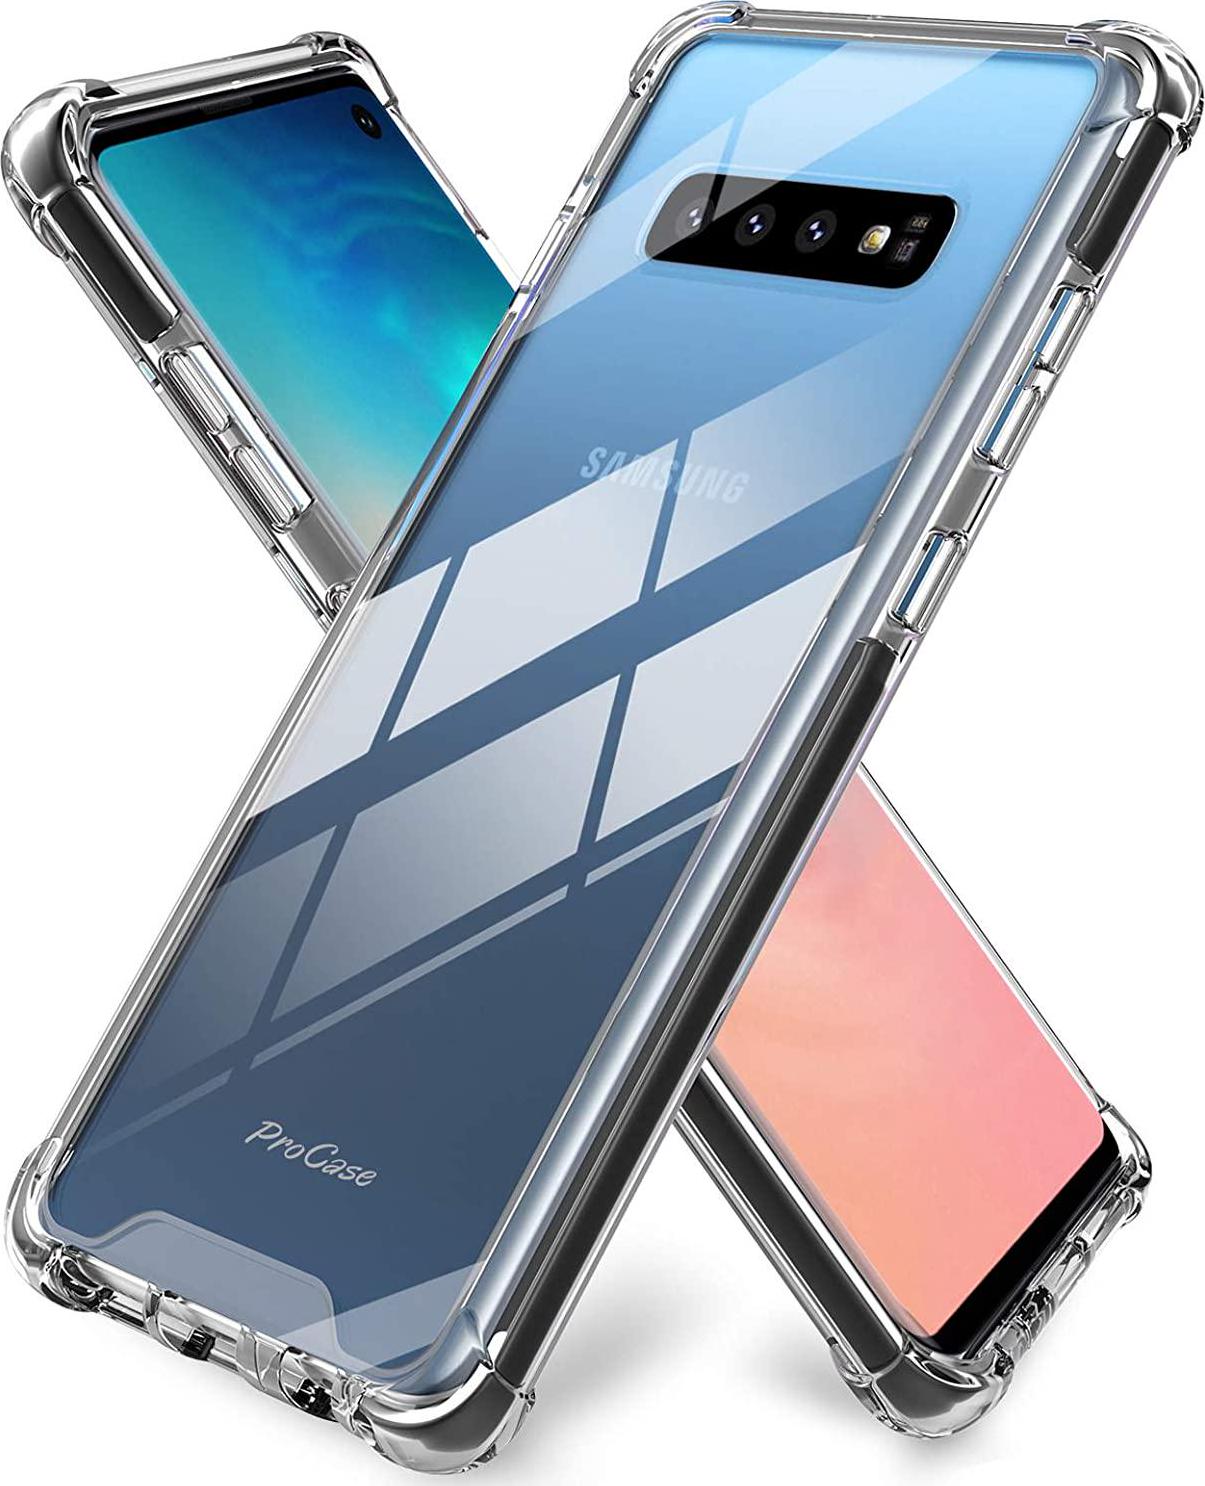 Procase, ProCase Galaxy S10 Case, Slim Hybrid Crystal Clear TPU Bumper Cushion Cover with Reinforced Corners, Transparent Scratch Resistant Rugged Cover Protective Case for Samsung Galaxy S10 2019 Black Frame